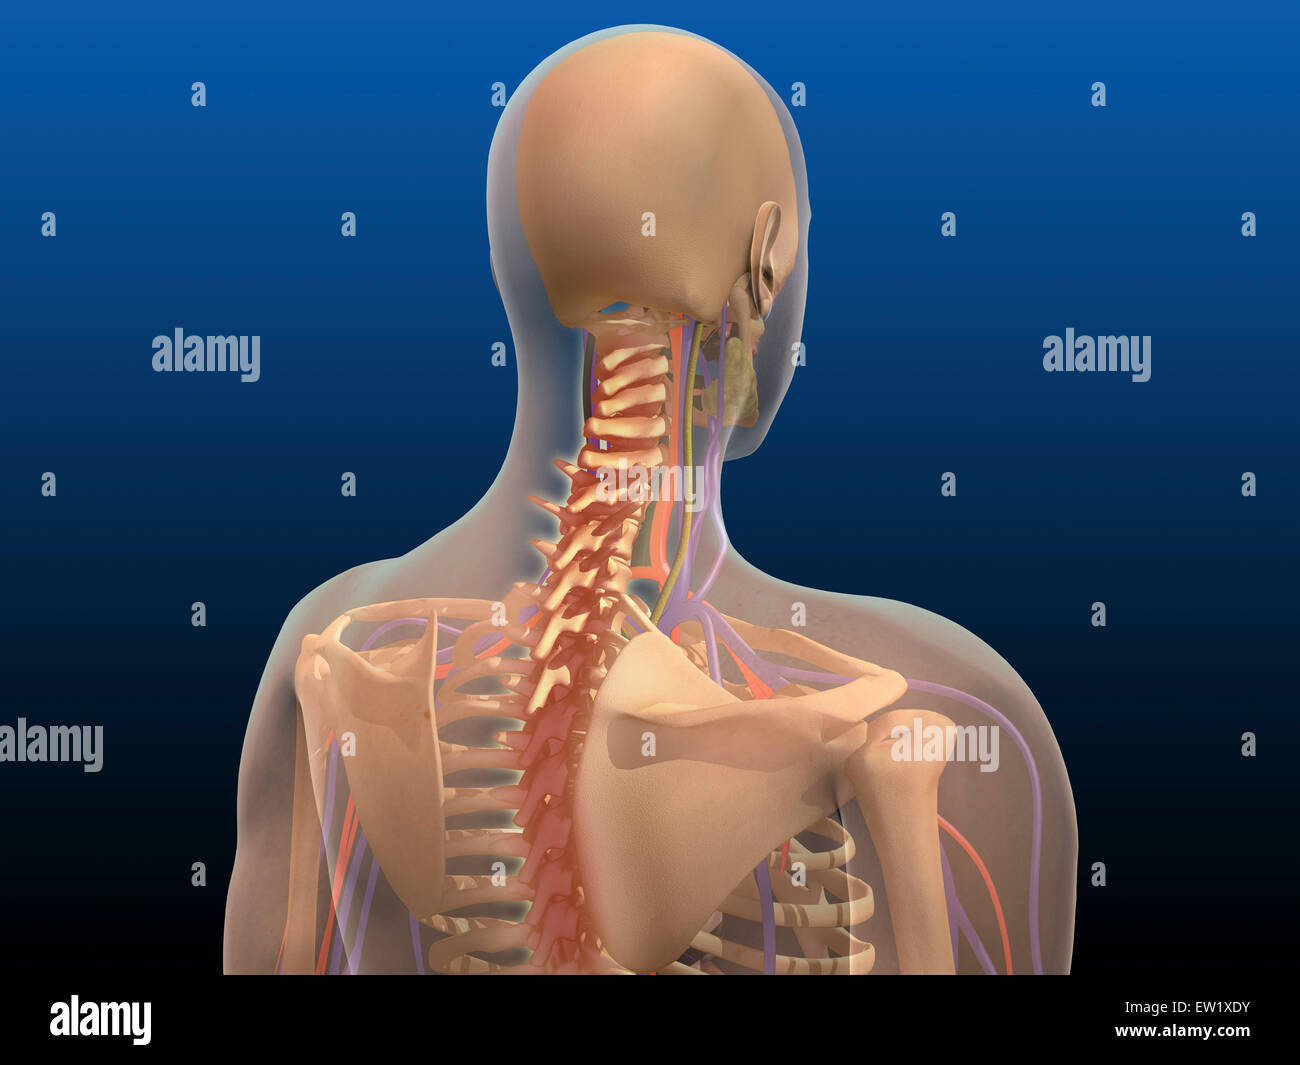 Rear view of human body showing spinal cord and scapula. Stock Photo